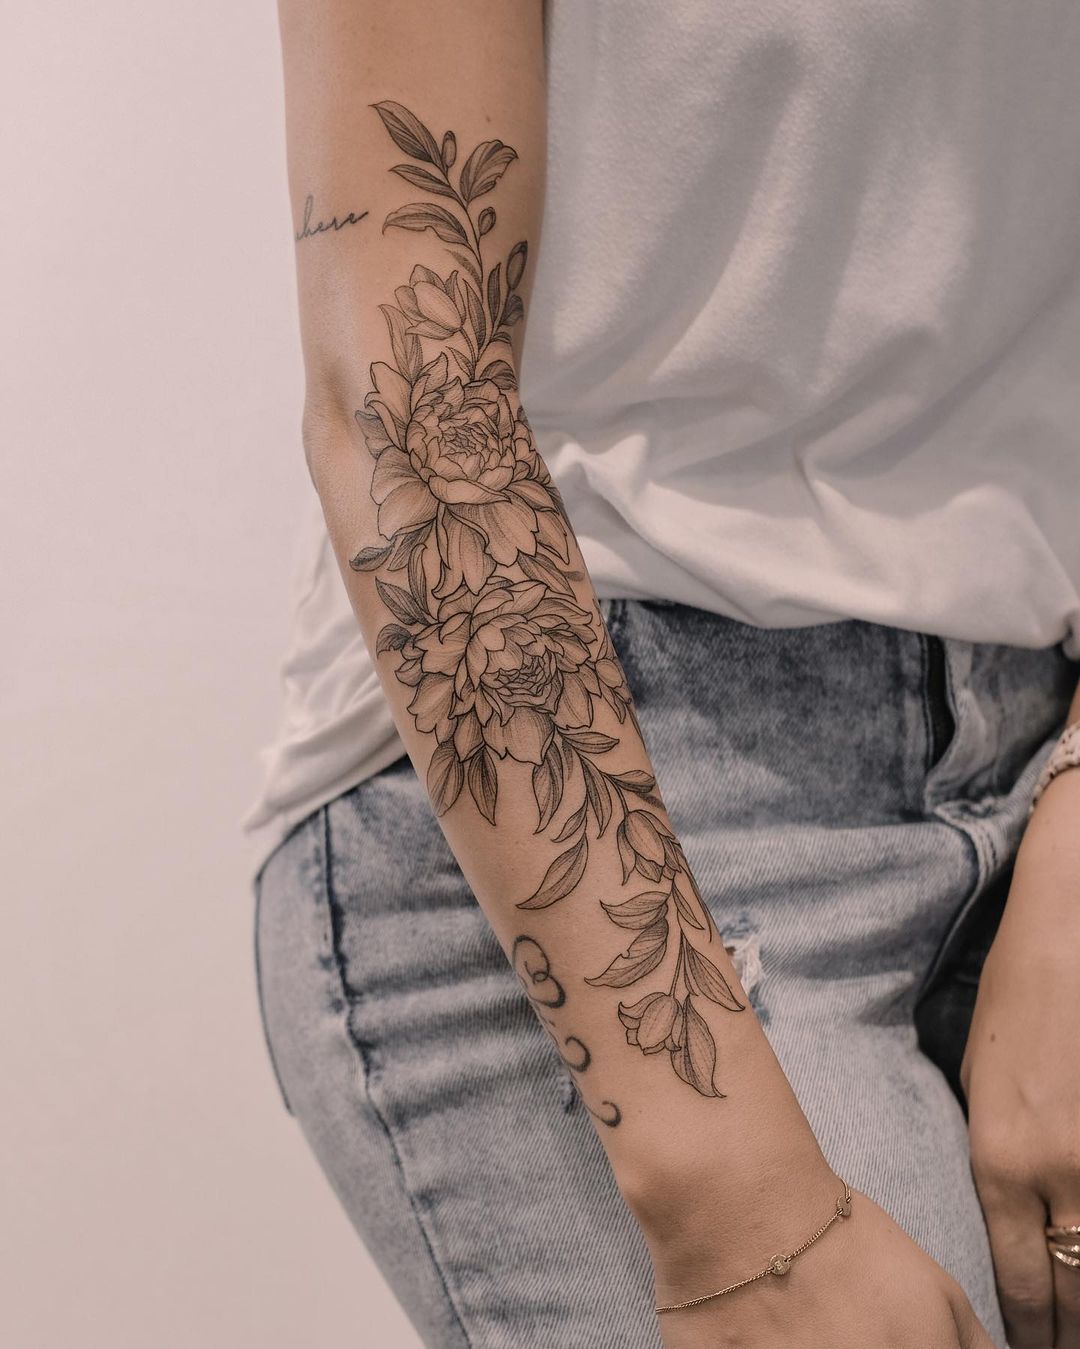 Delicate flower tattoos for girls by Roman Itchev